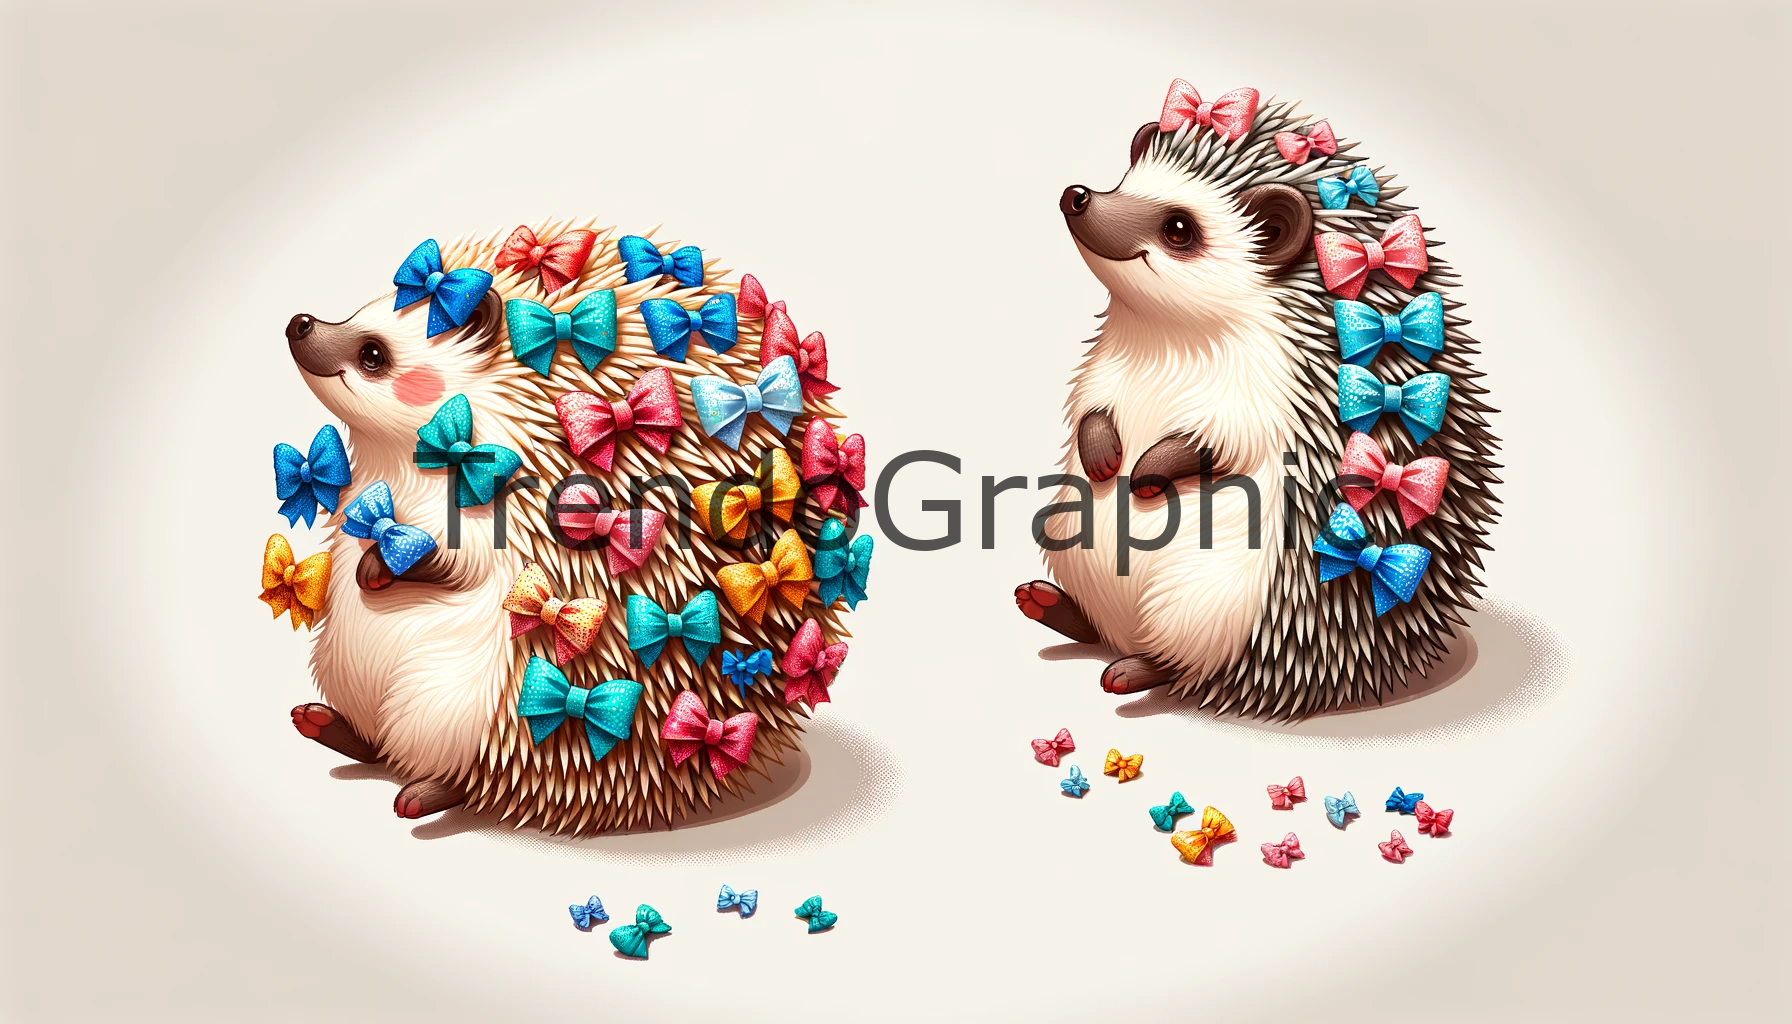 Adorable Decorated Hedgehog: Playful Poses with Colorful Bows